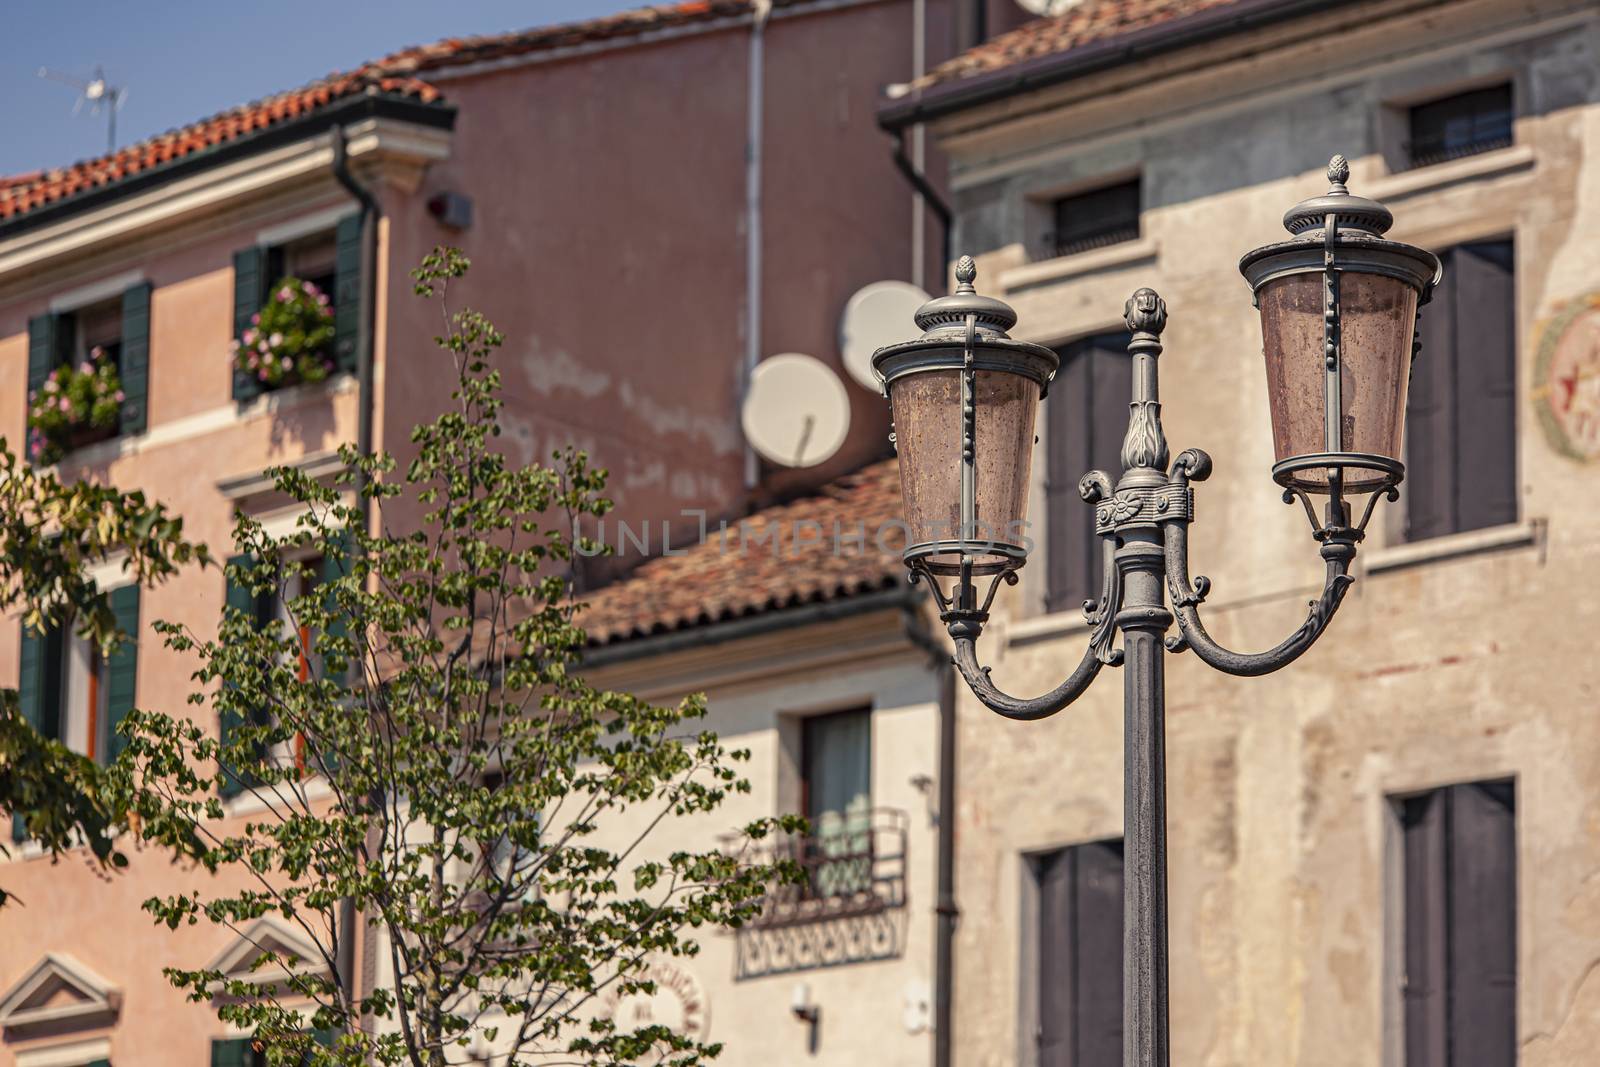 Architecture detail with street lamp in Treviso in Italy